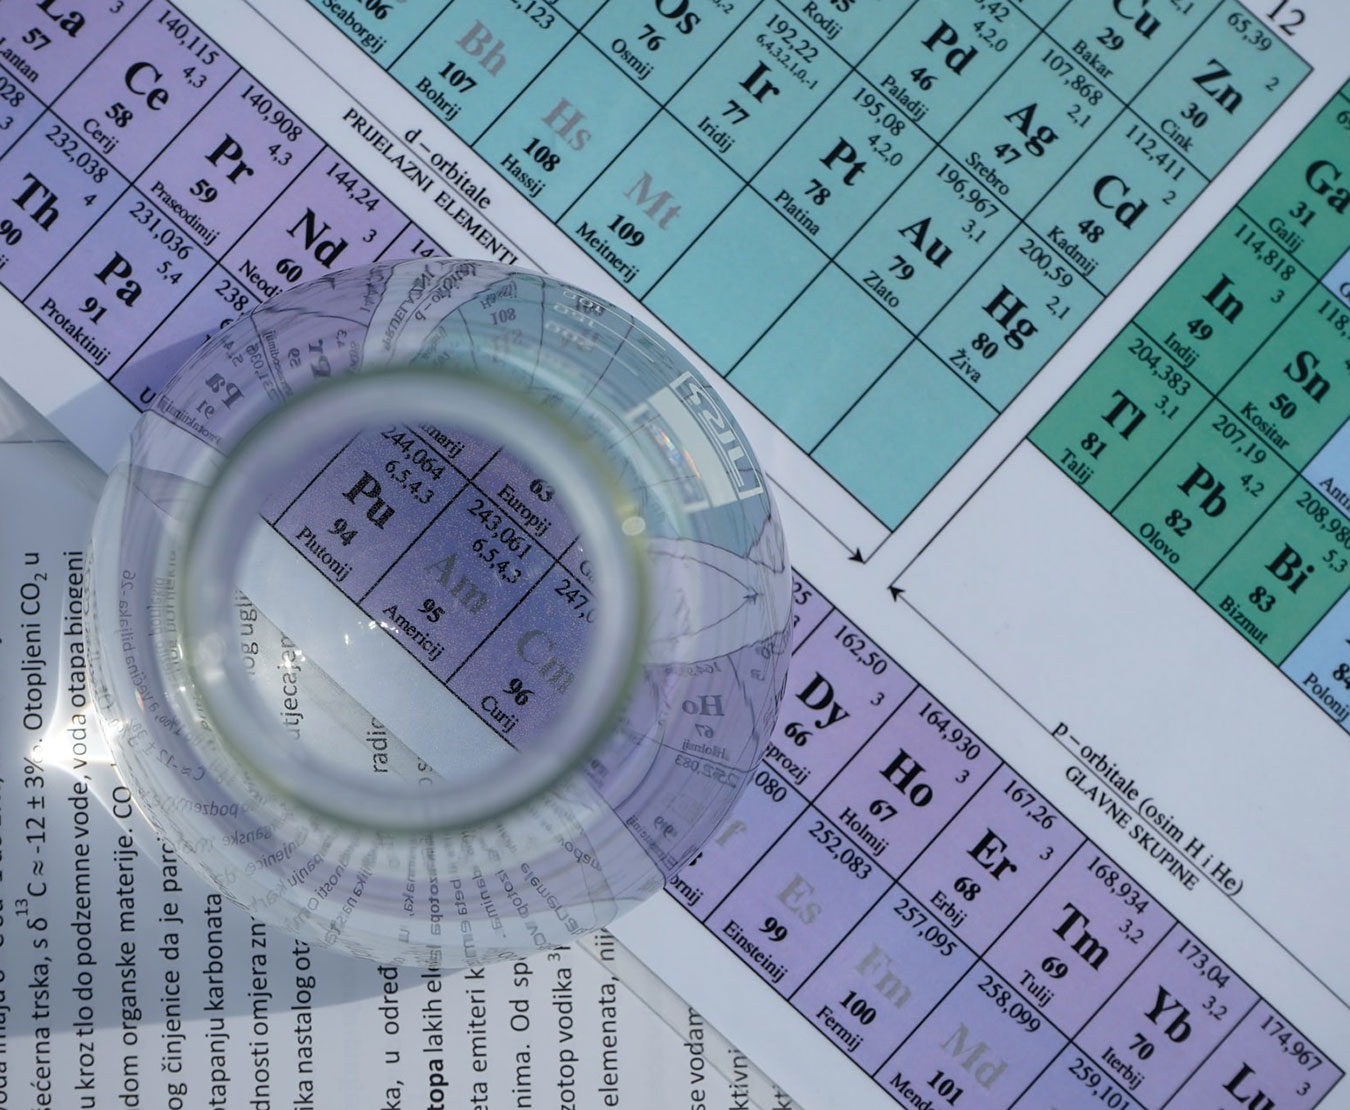 Flat bottom of Erlenmeyer flask magifies part of the periodic table of elements